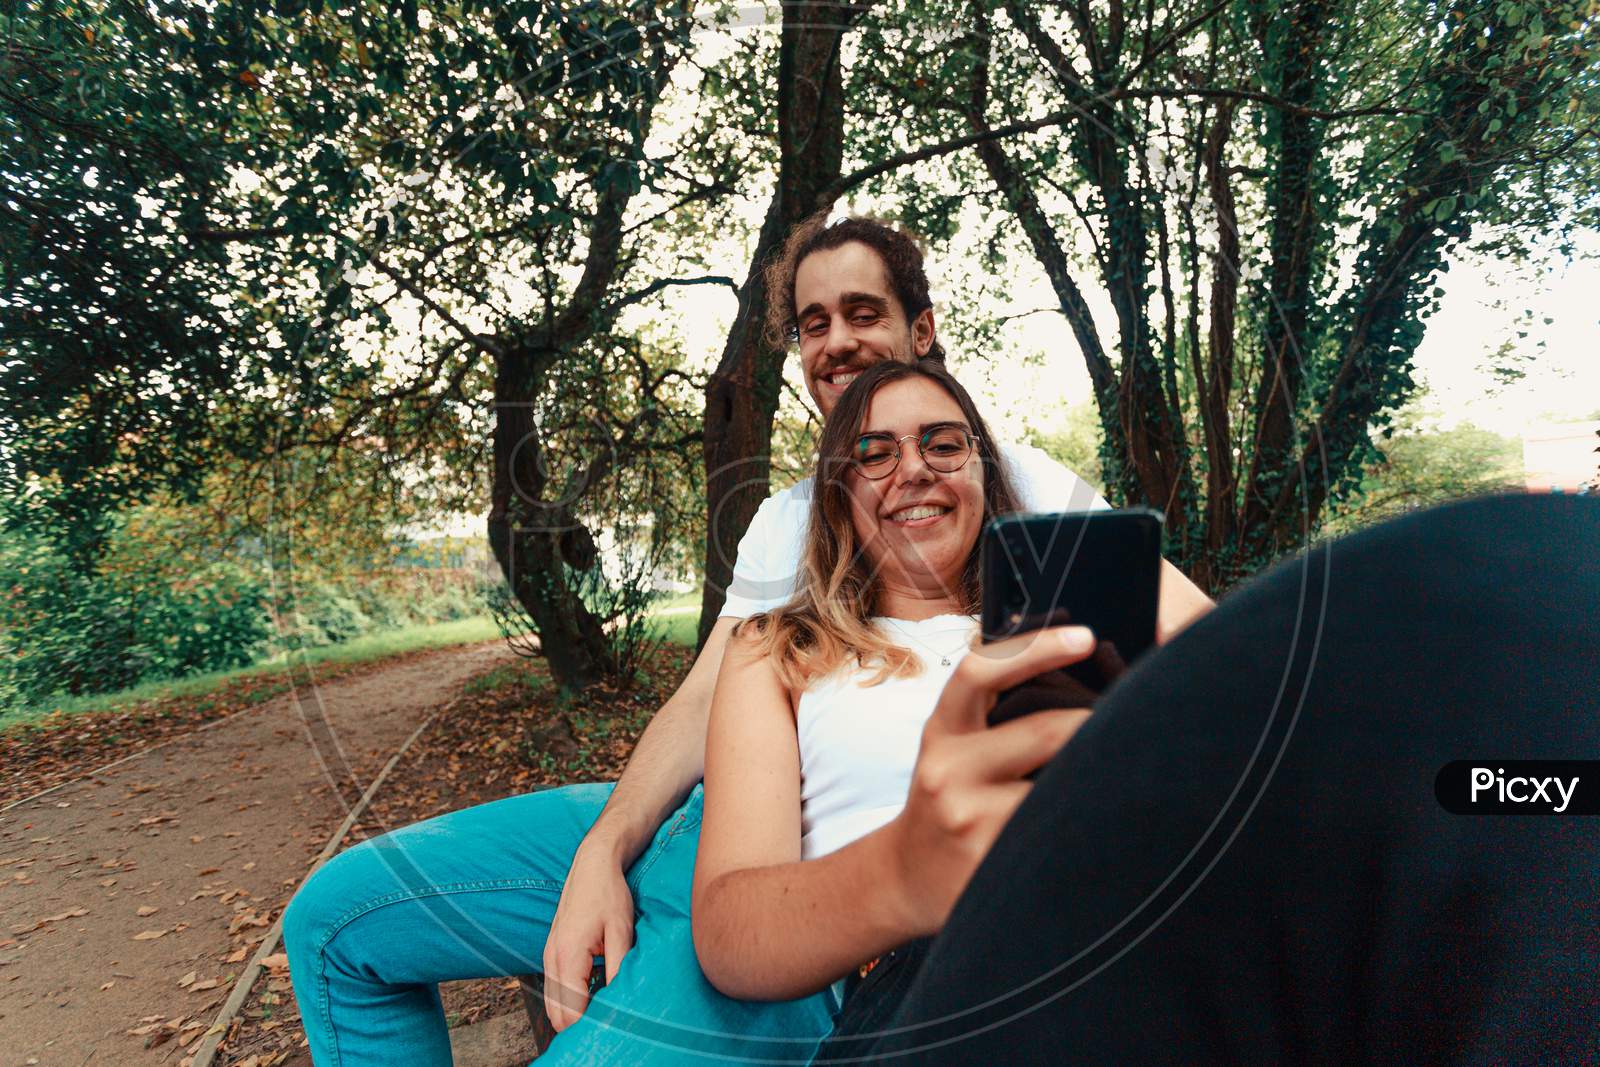 Young Couple Looking At The Smart Phone In A Bench On The Park While Smiling